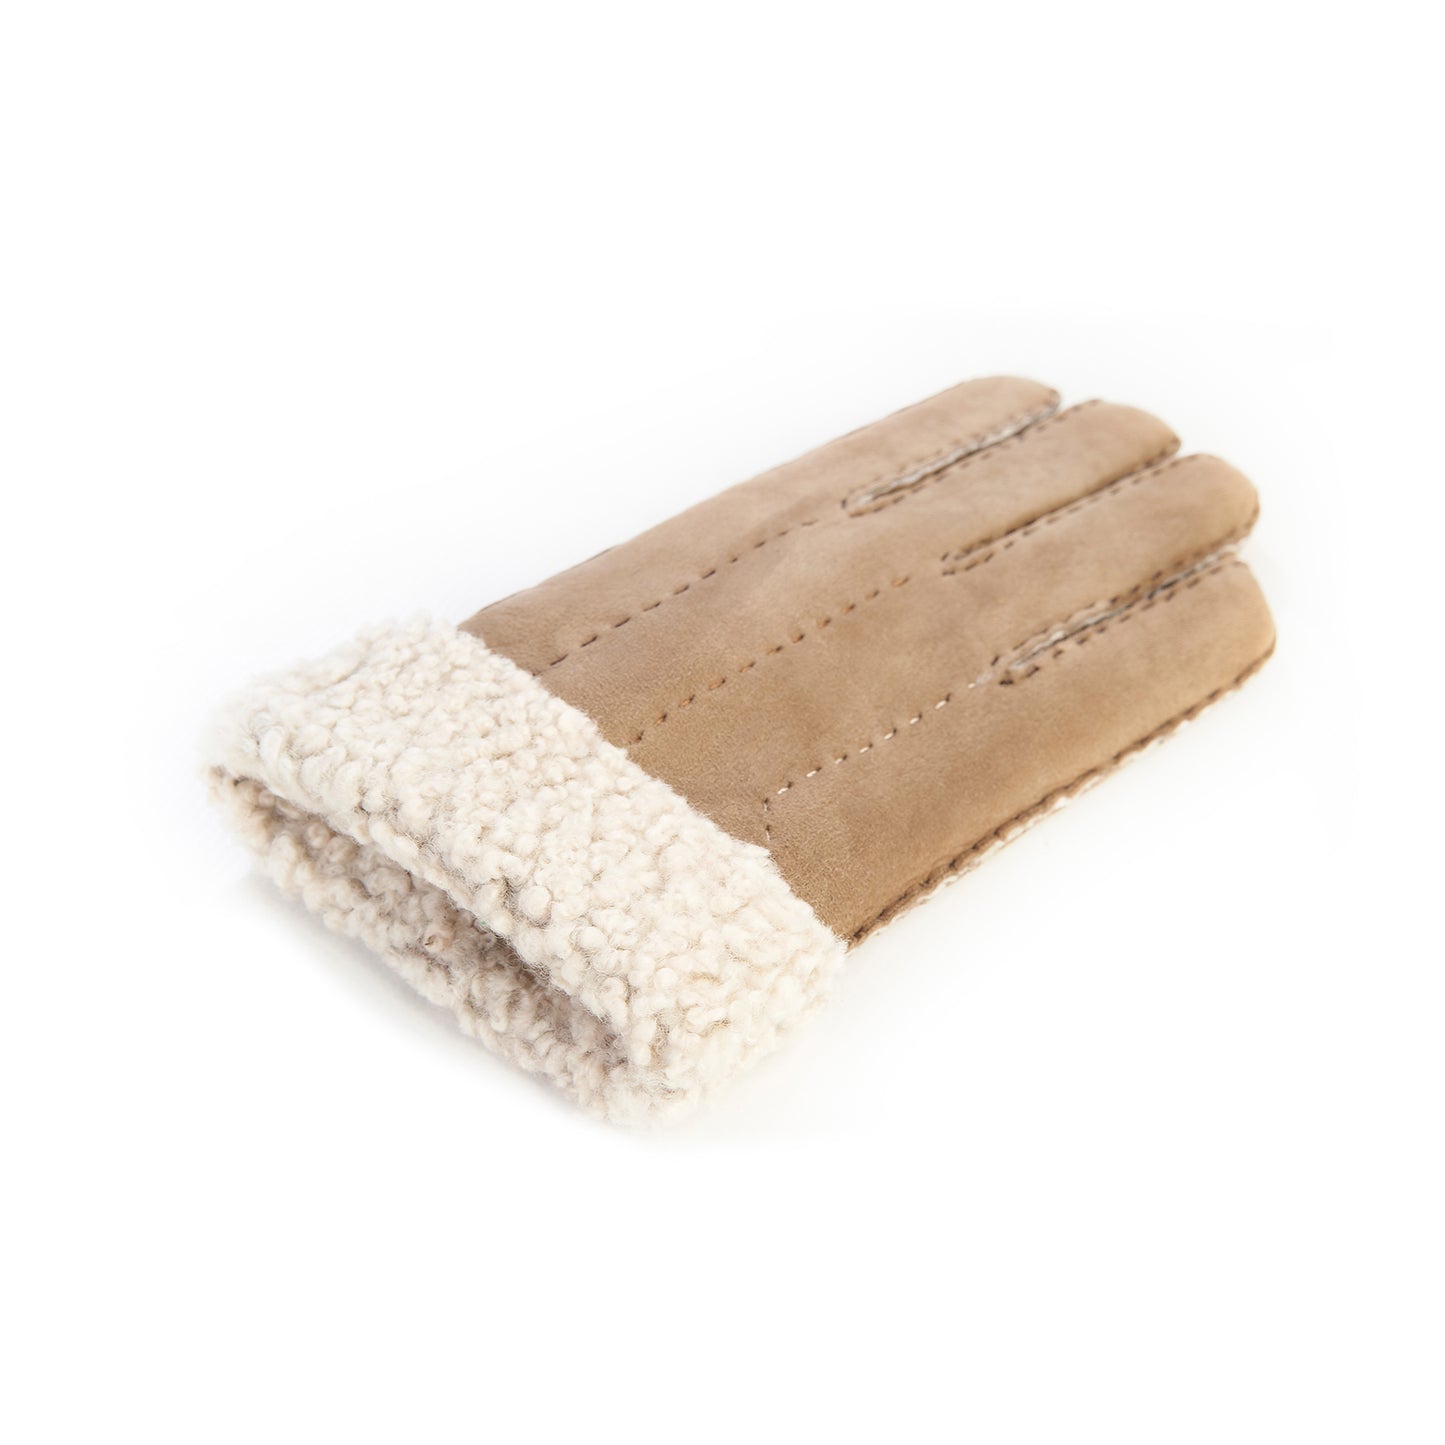 Women's lambskin gloves with hand stitched details on top color beige